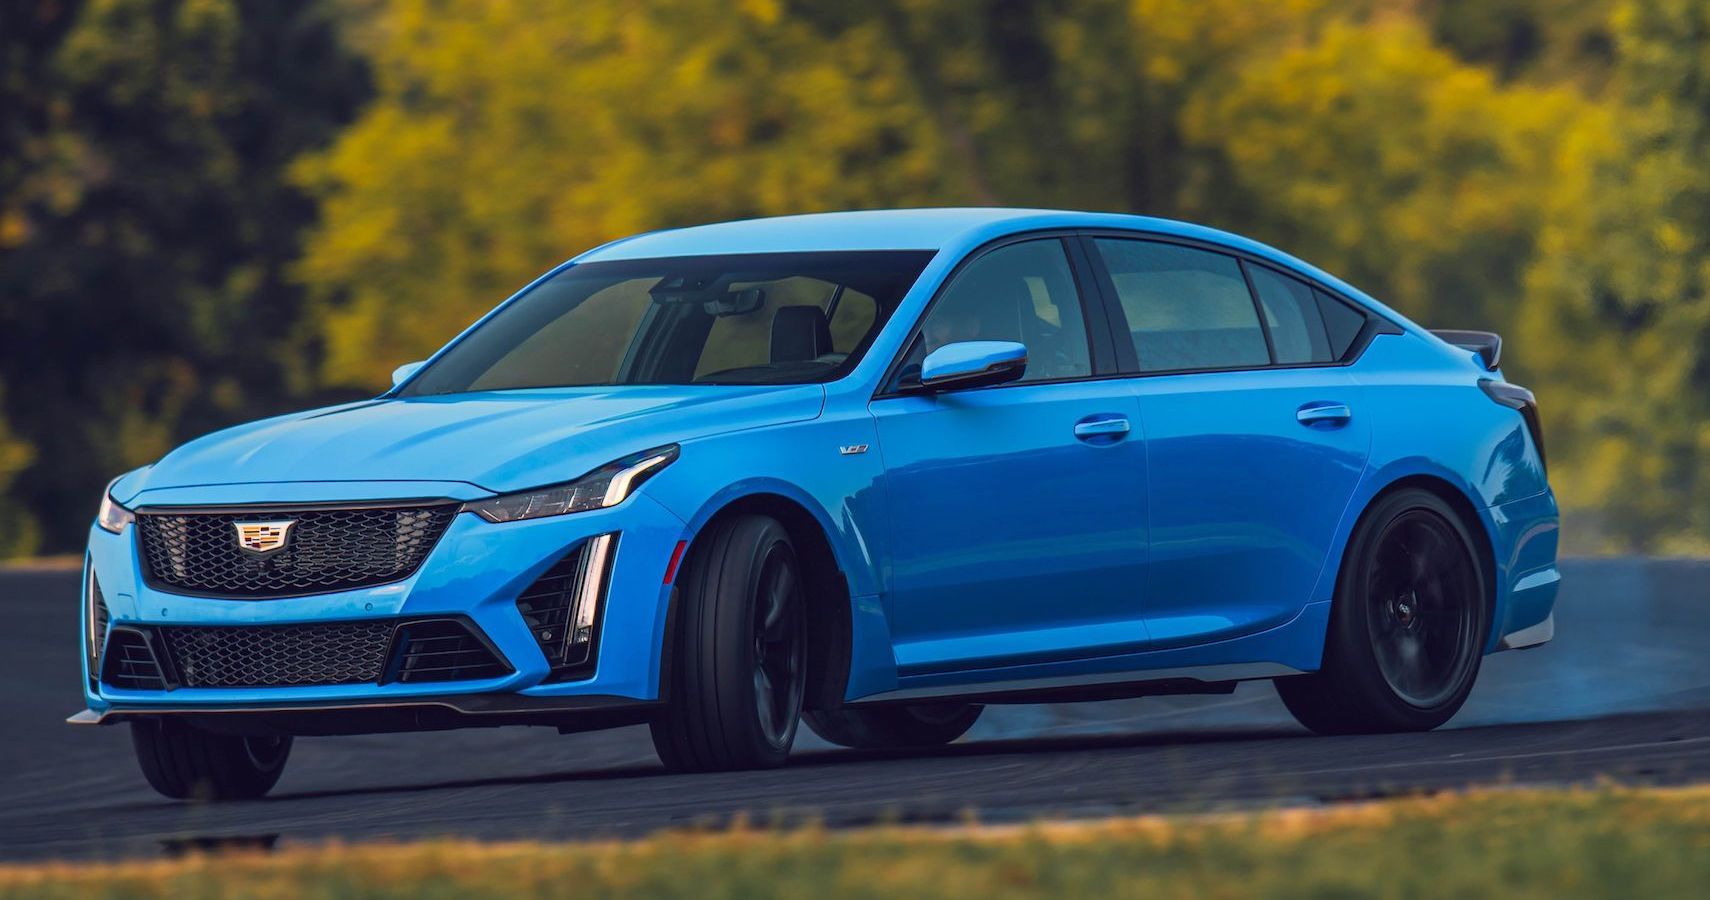 5 Crazy Fast American Sports Sedans (5 Foreign Models We'd Rather Buy)